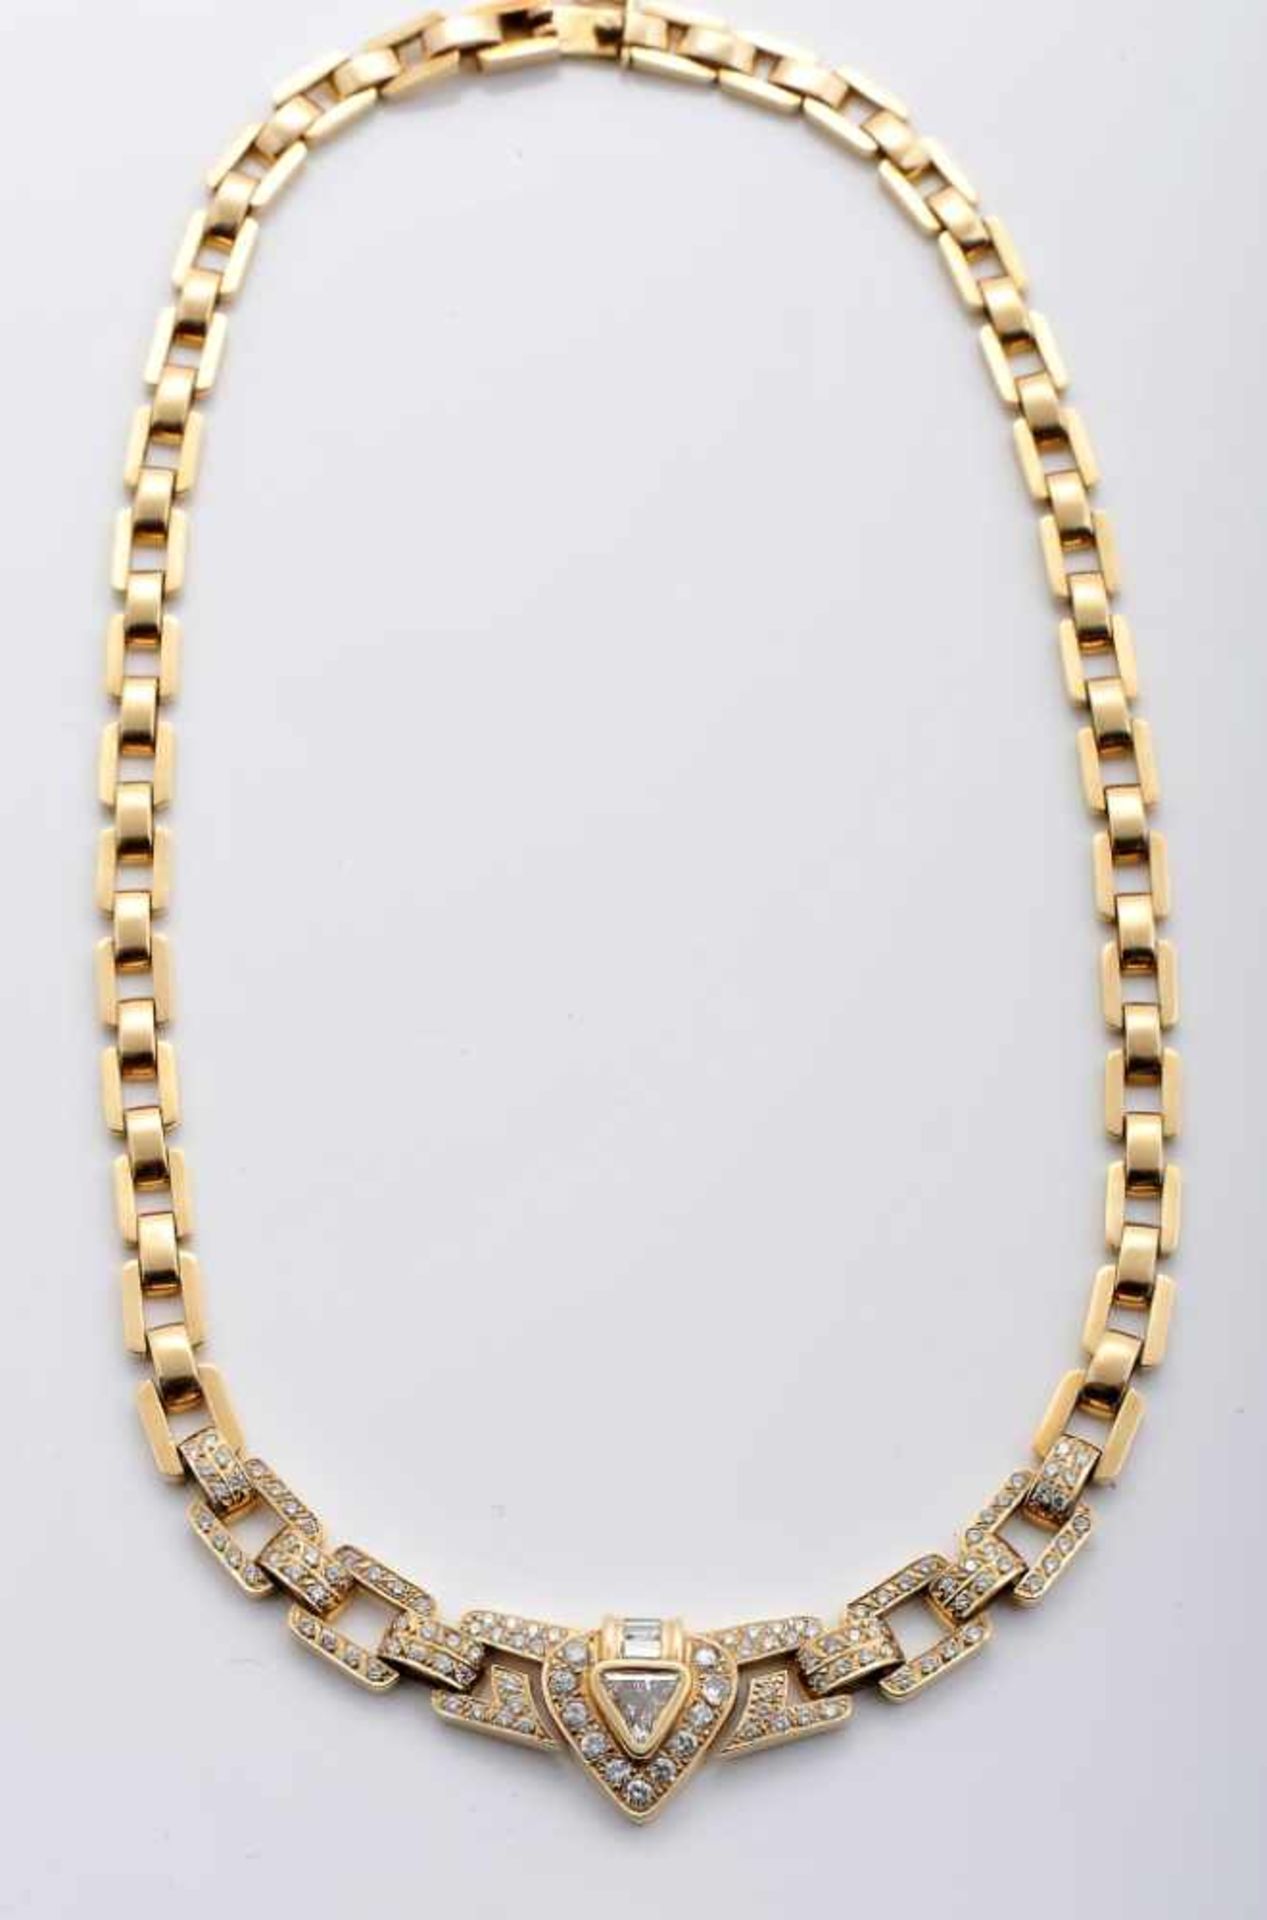 A NecklaceA Necklace, 585/1000 gold, set with 1 triangle cut diamond with an approximate weight of